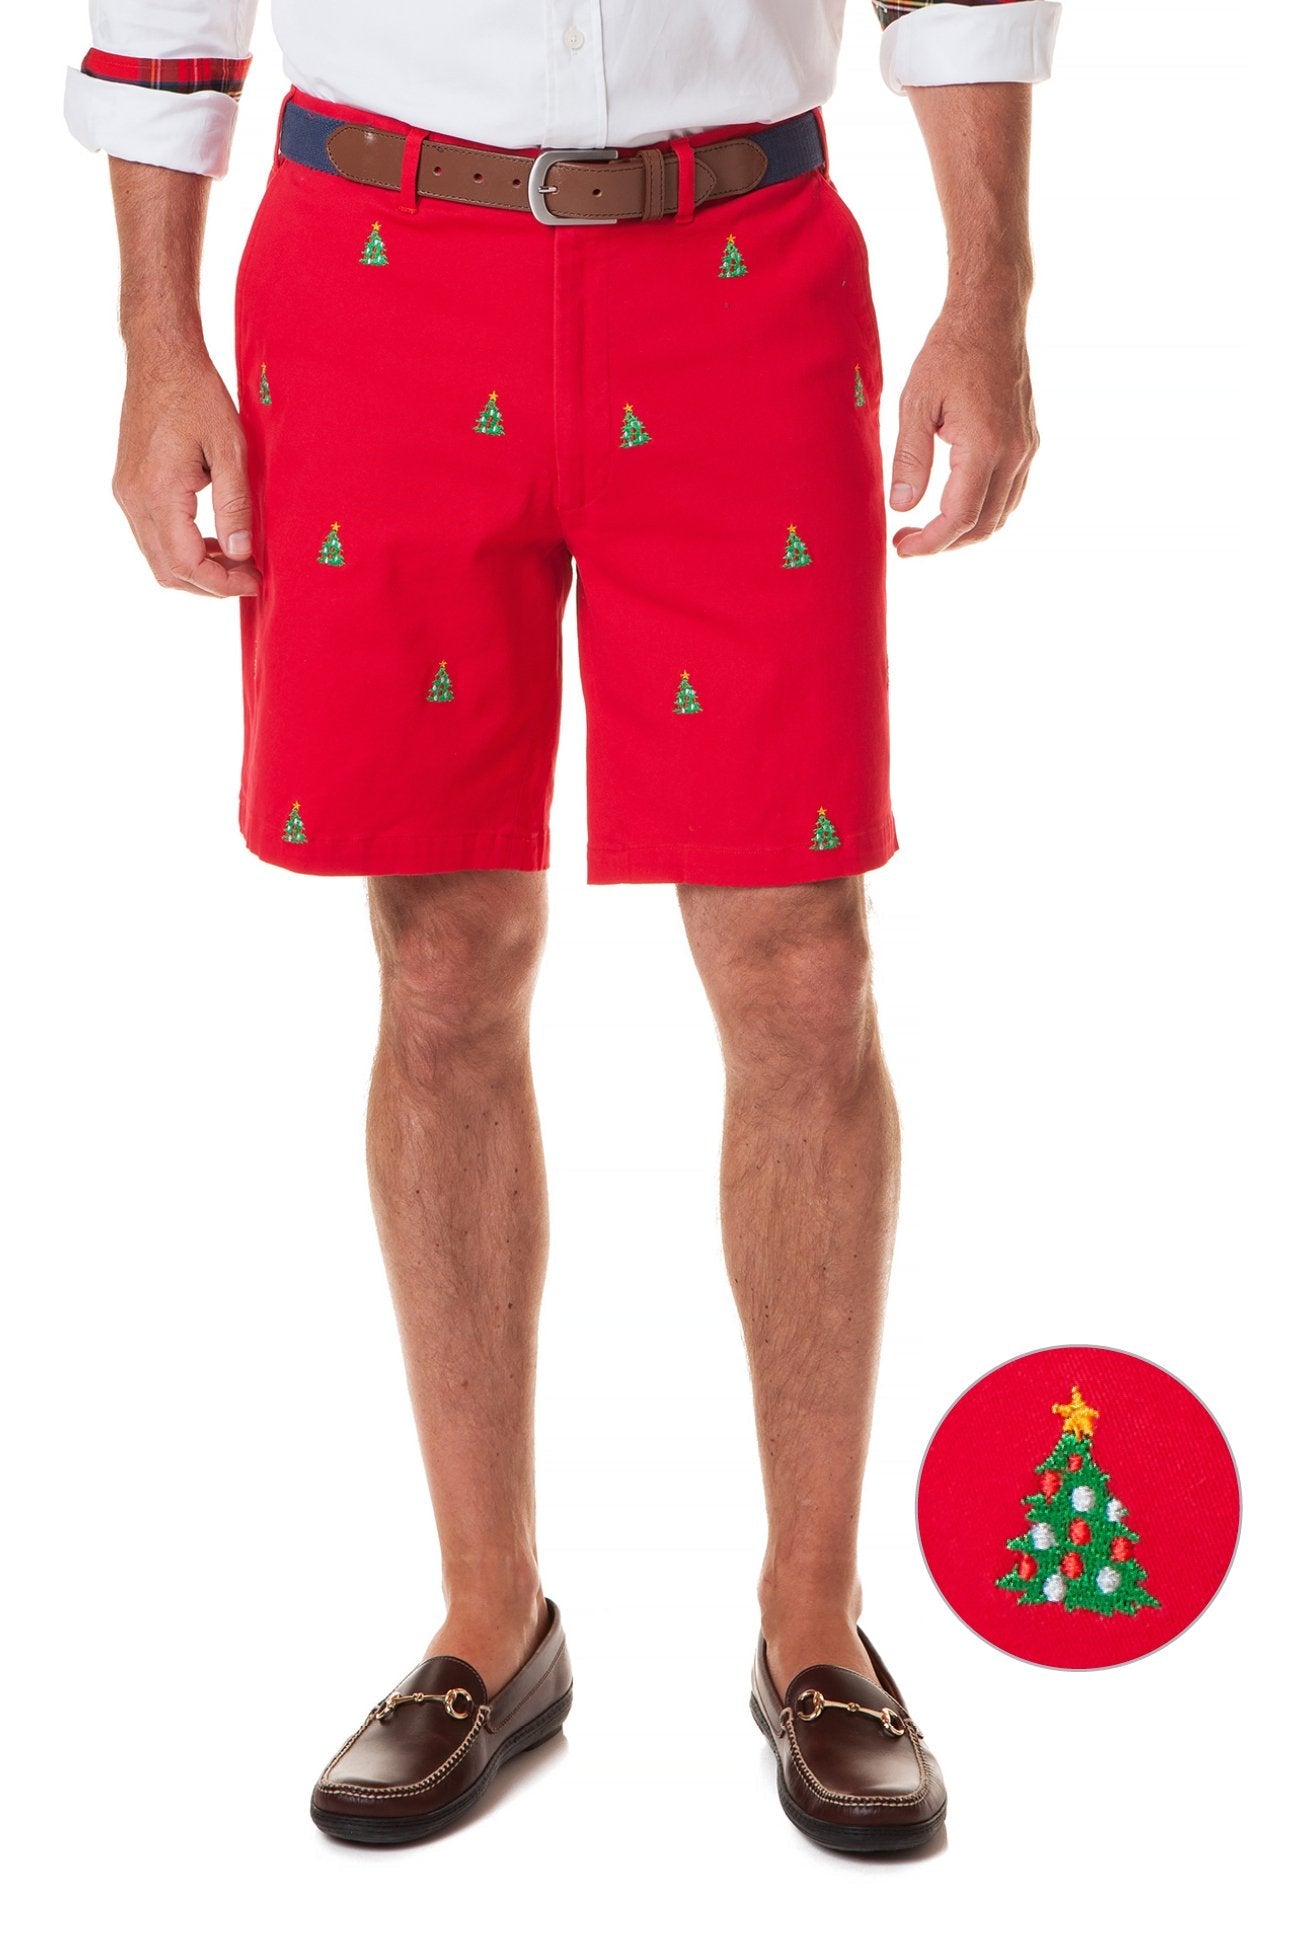 Castaway Mens Christmas Shorts Red Twill with Christmas Trees ...